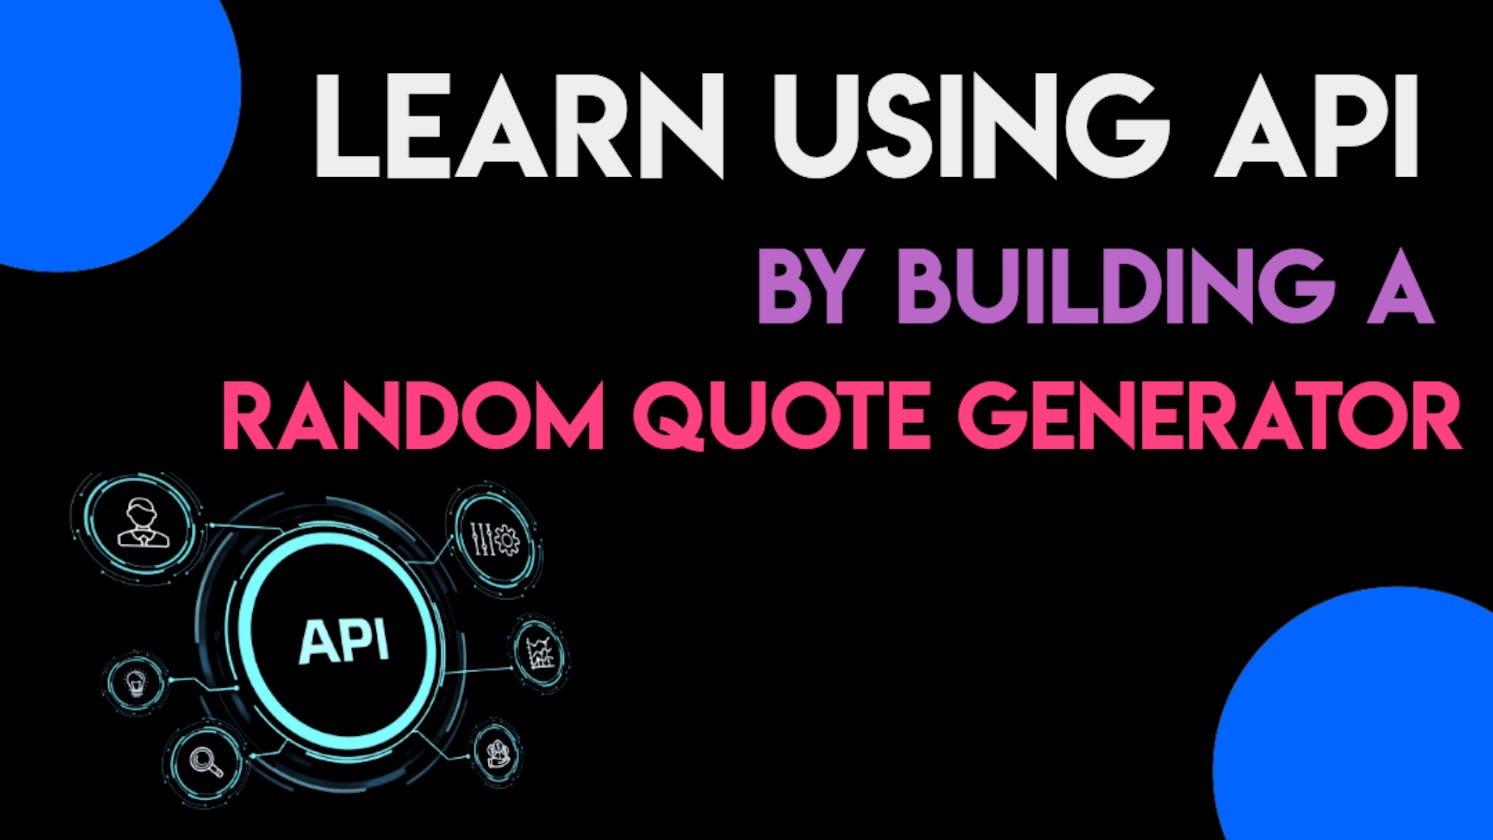 Building Your First API Project: A Random Quote Generator Tutorial